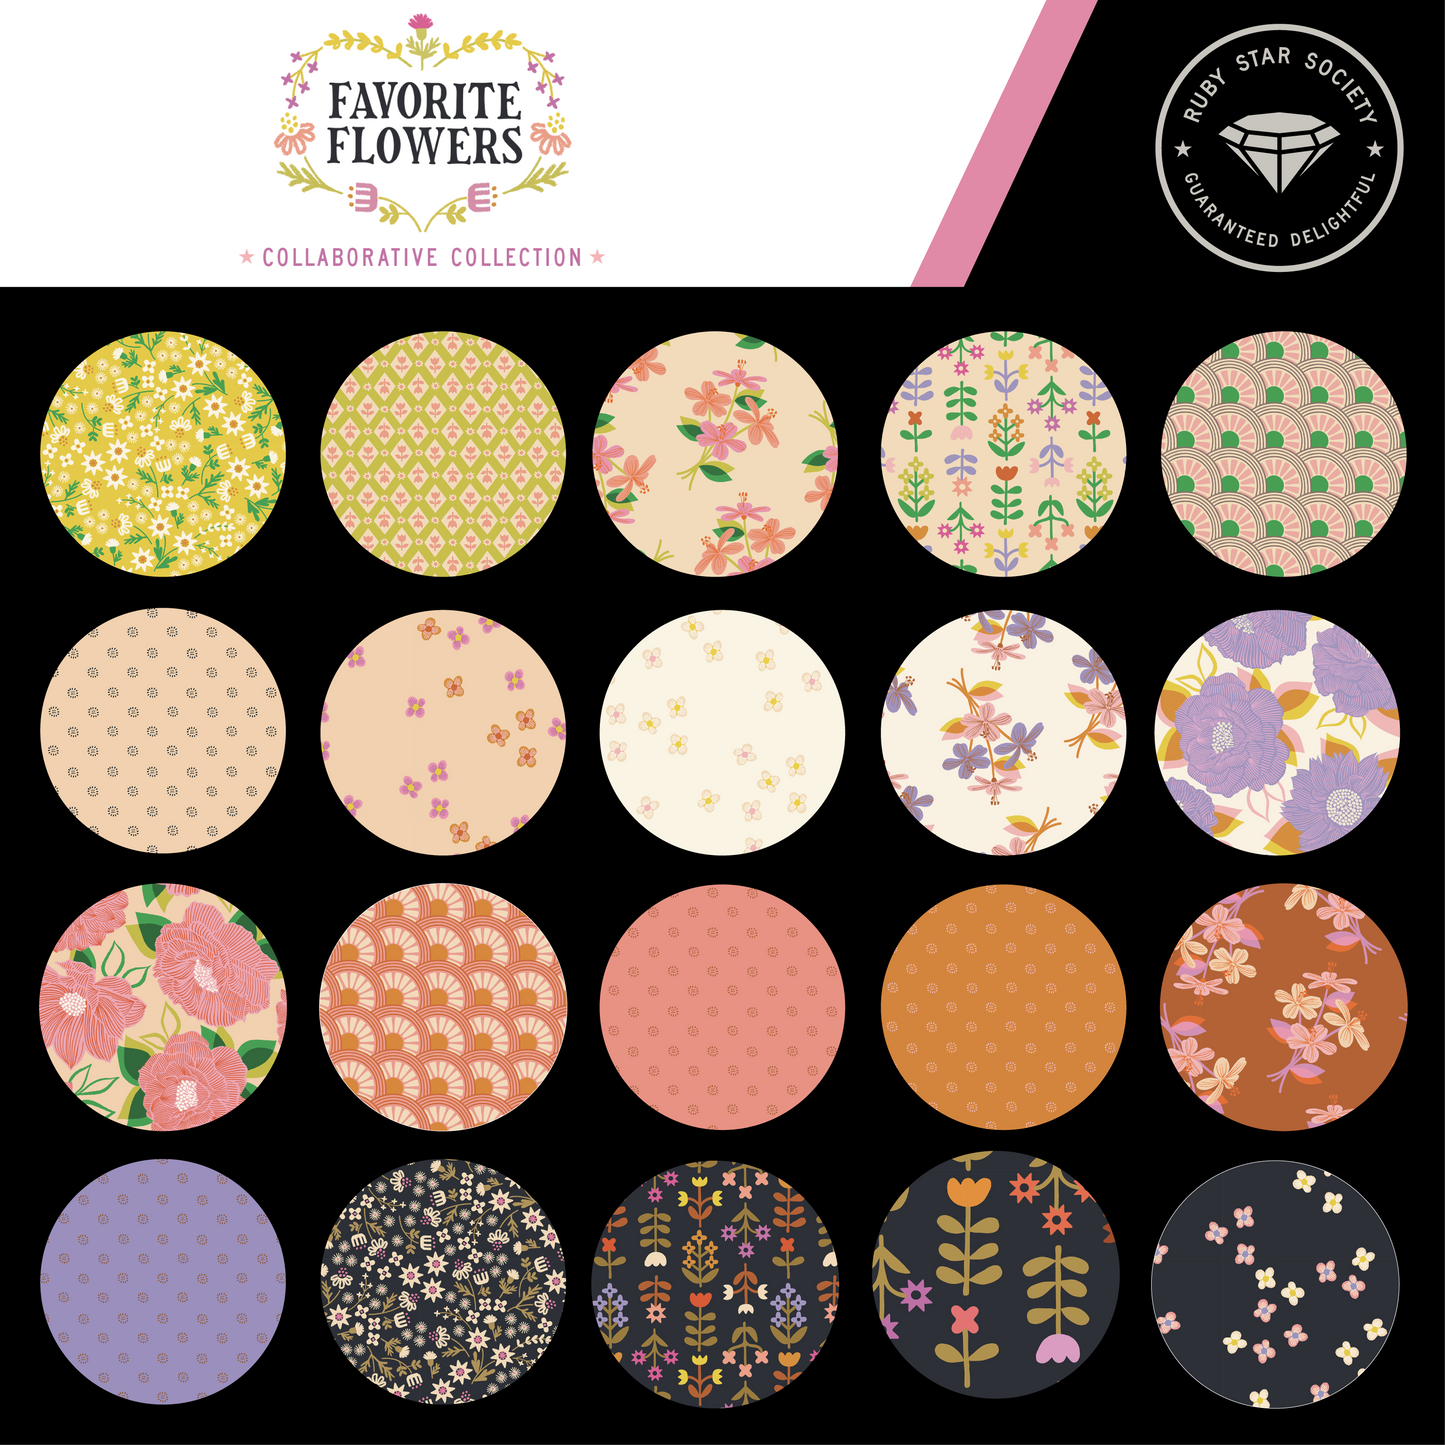 Favorite Flowers by Ruby Star Collaborative : Daisy Wheel Melon RS5145 14